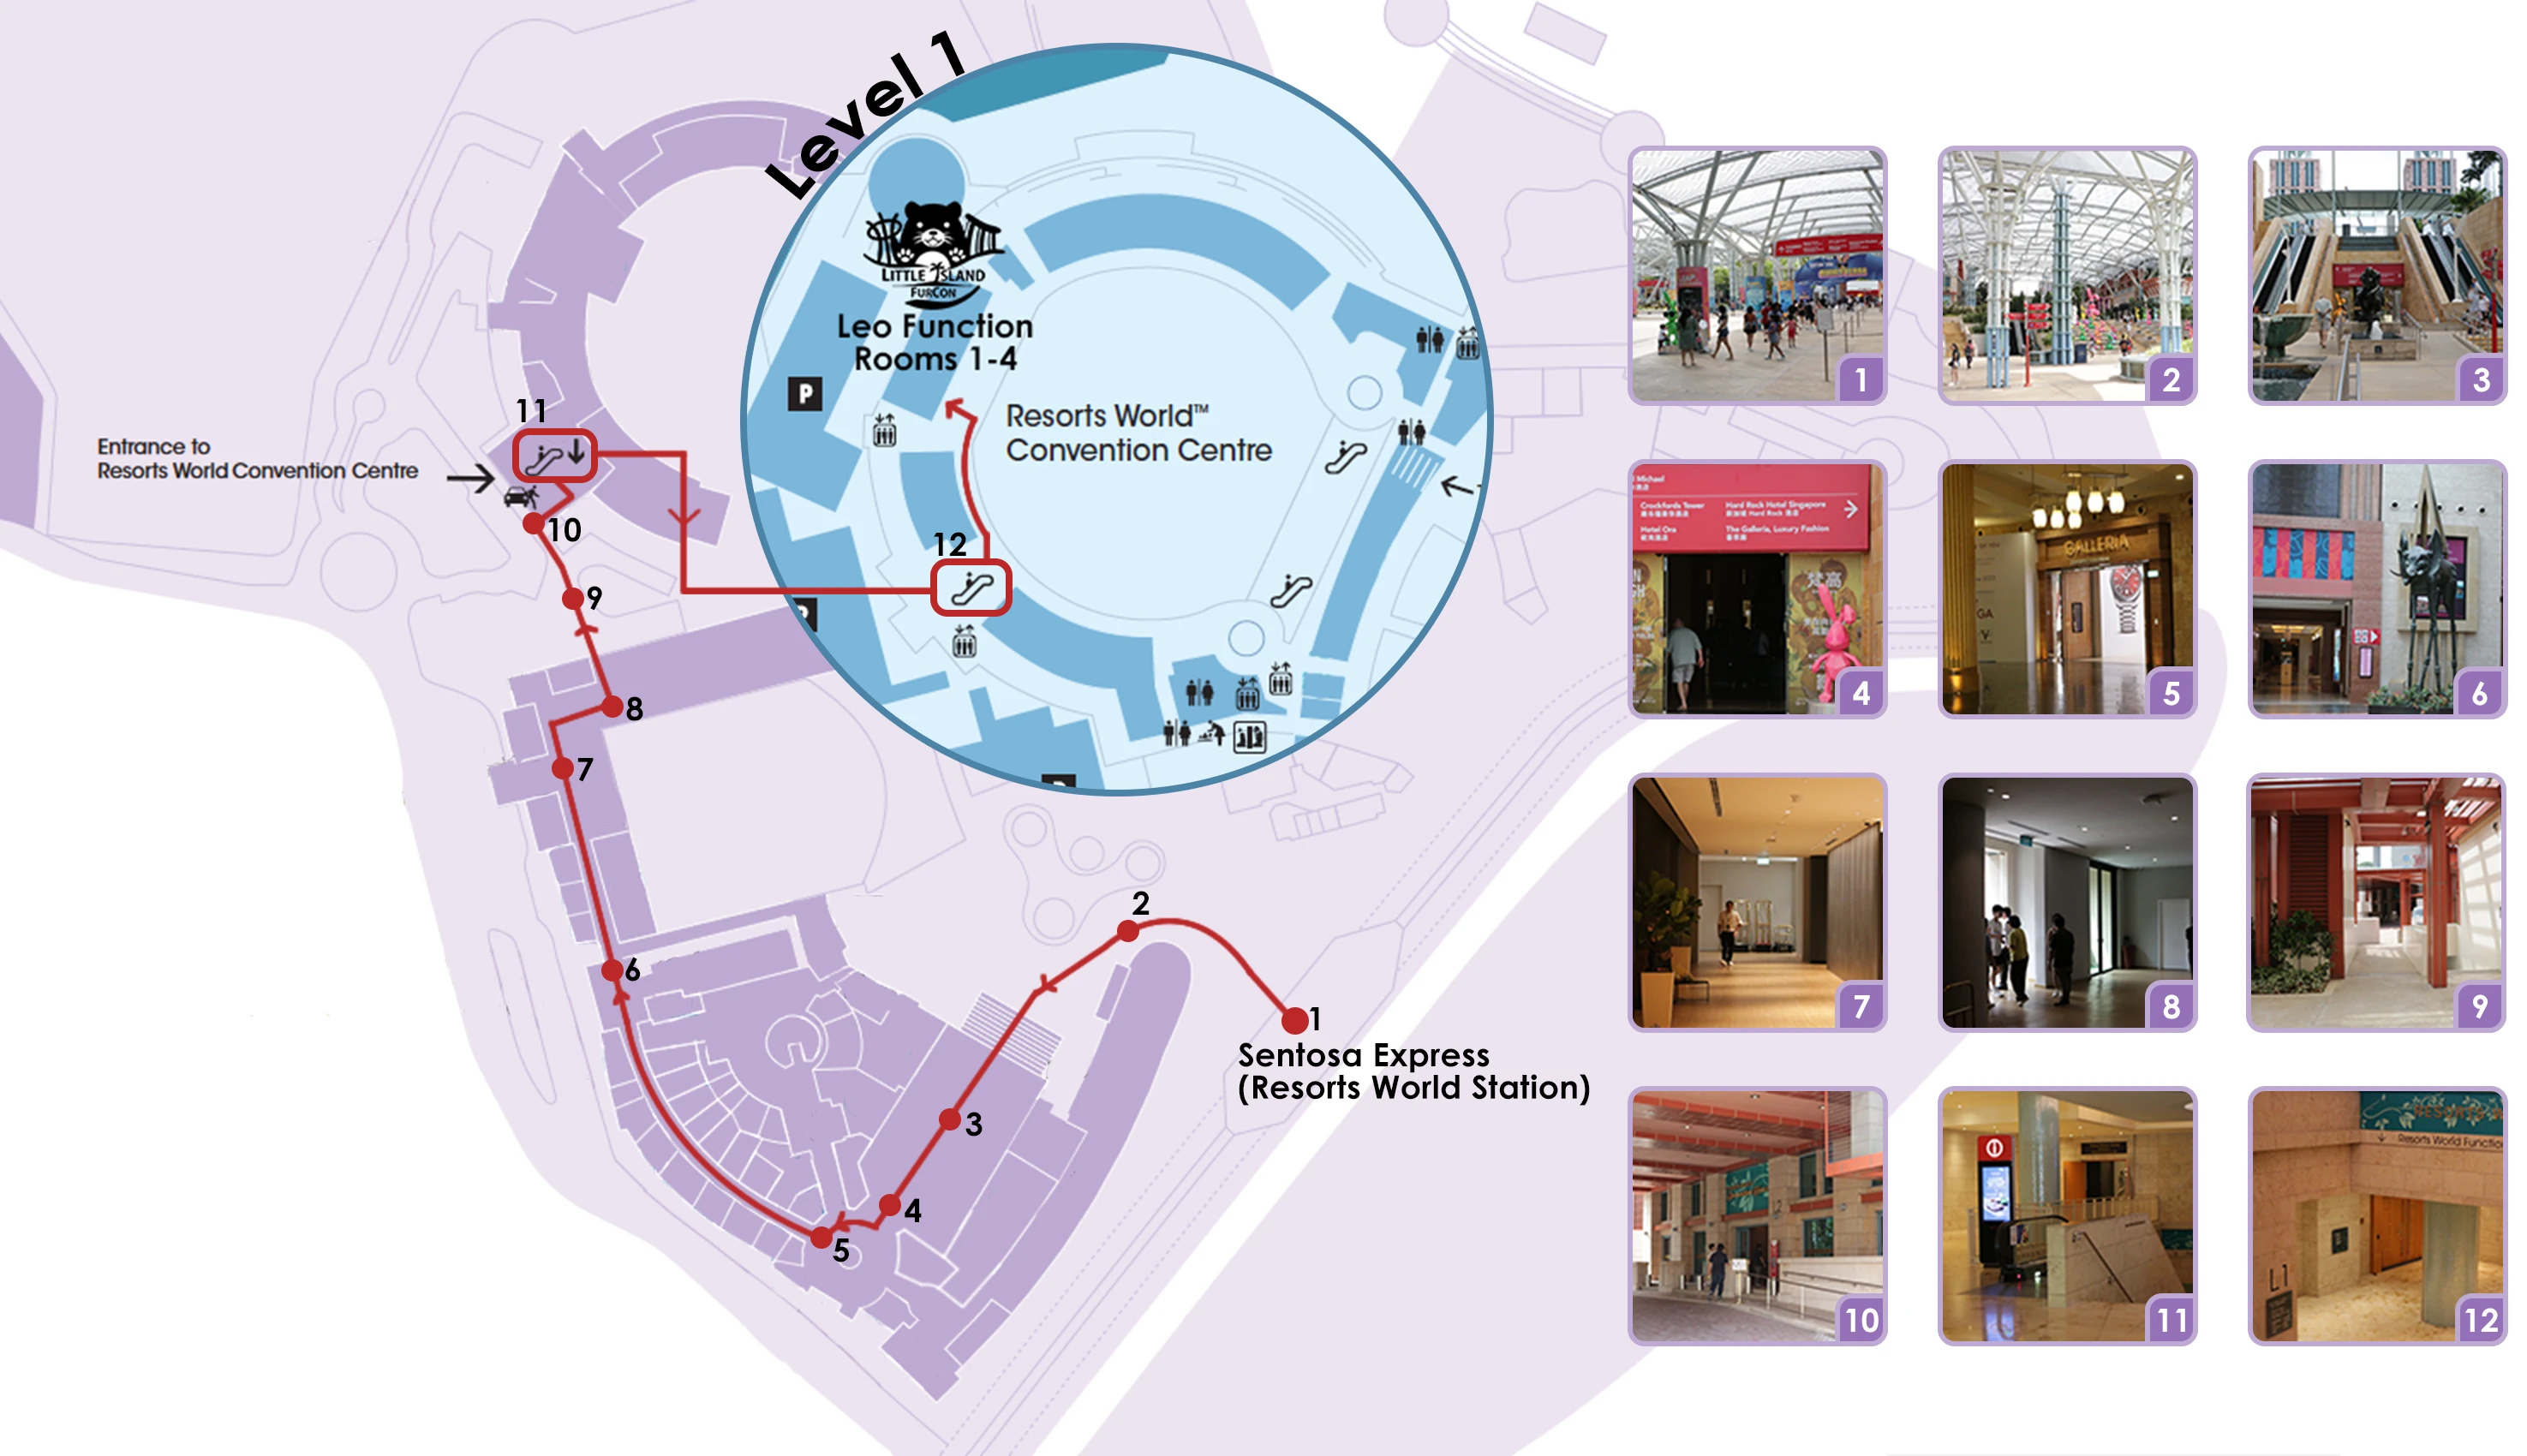 Map to get to the RWS Convention Centre once you are in Sentosa